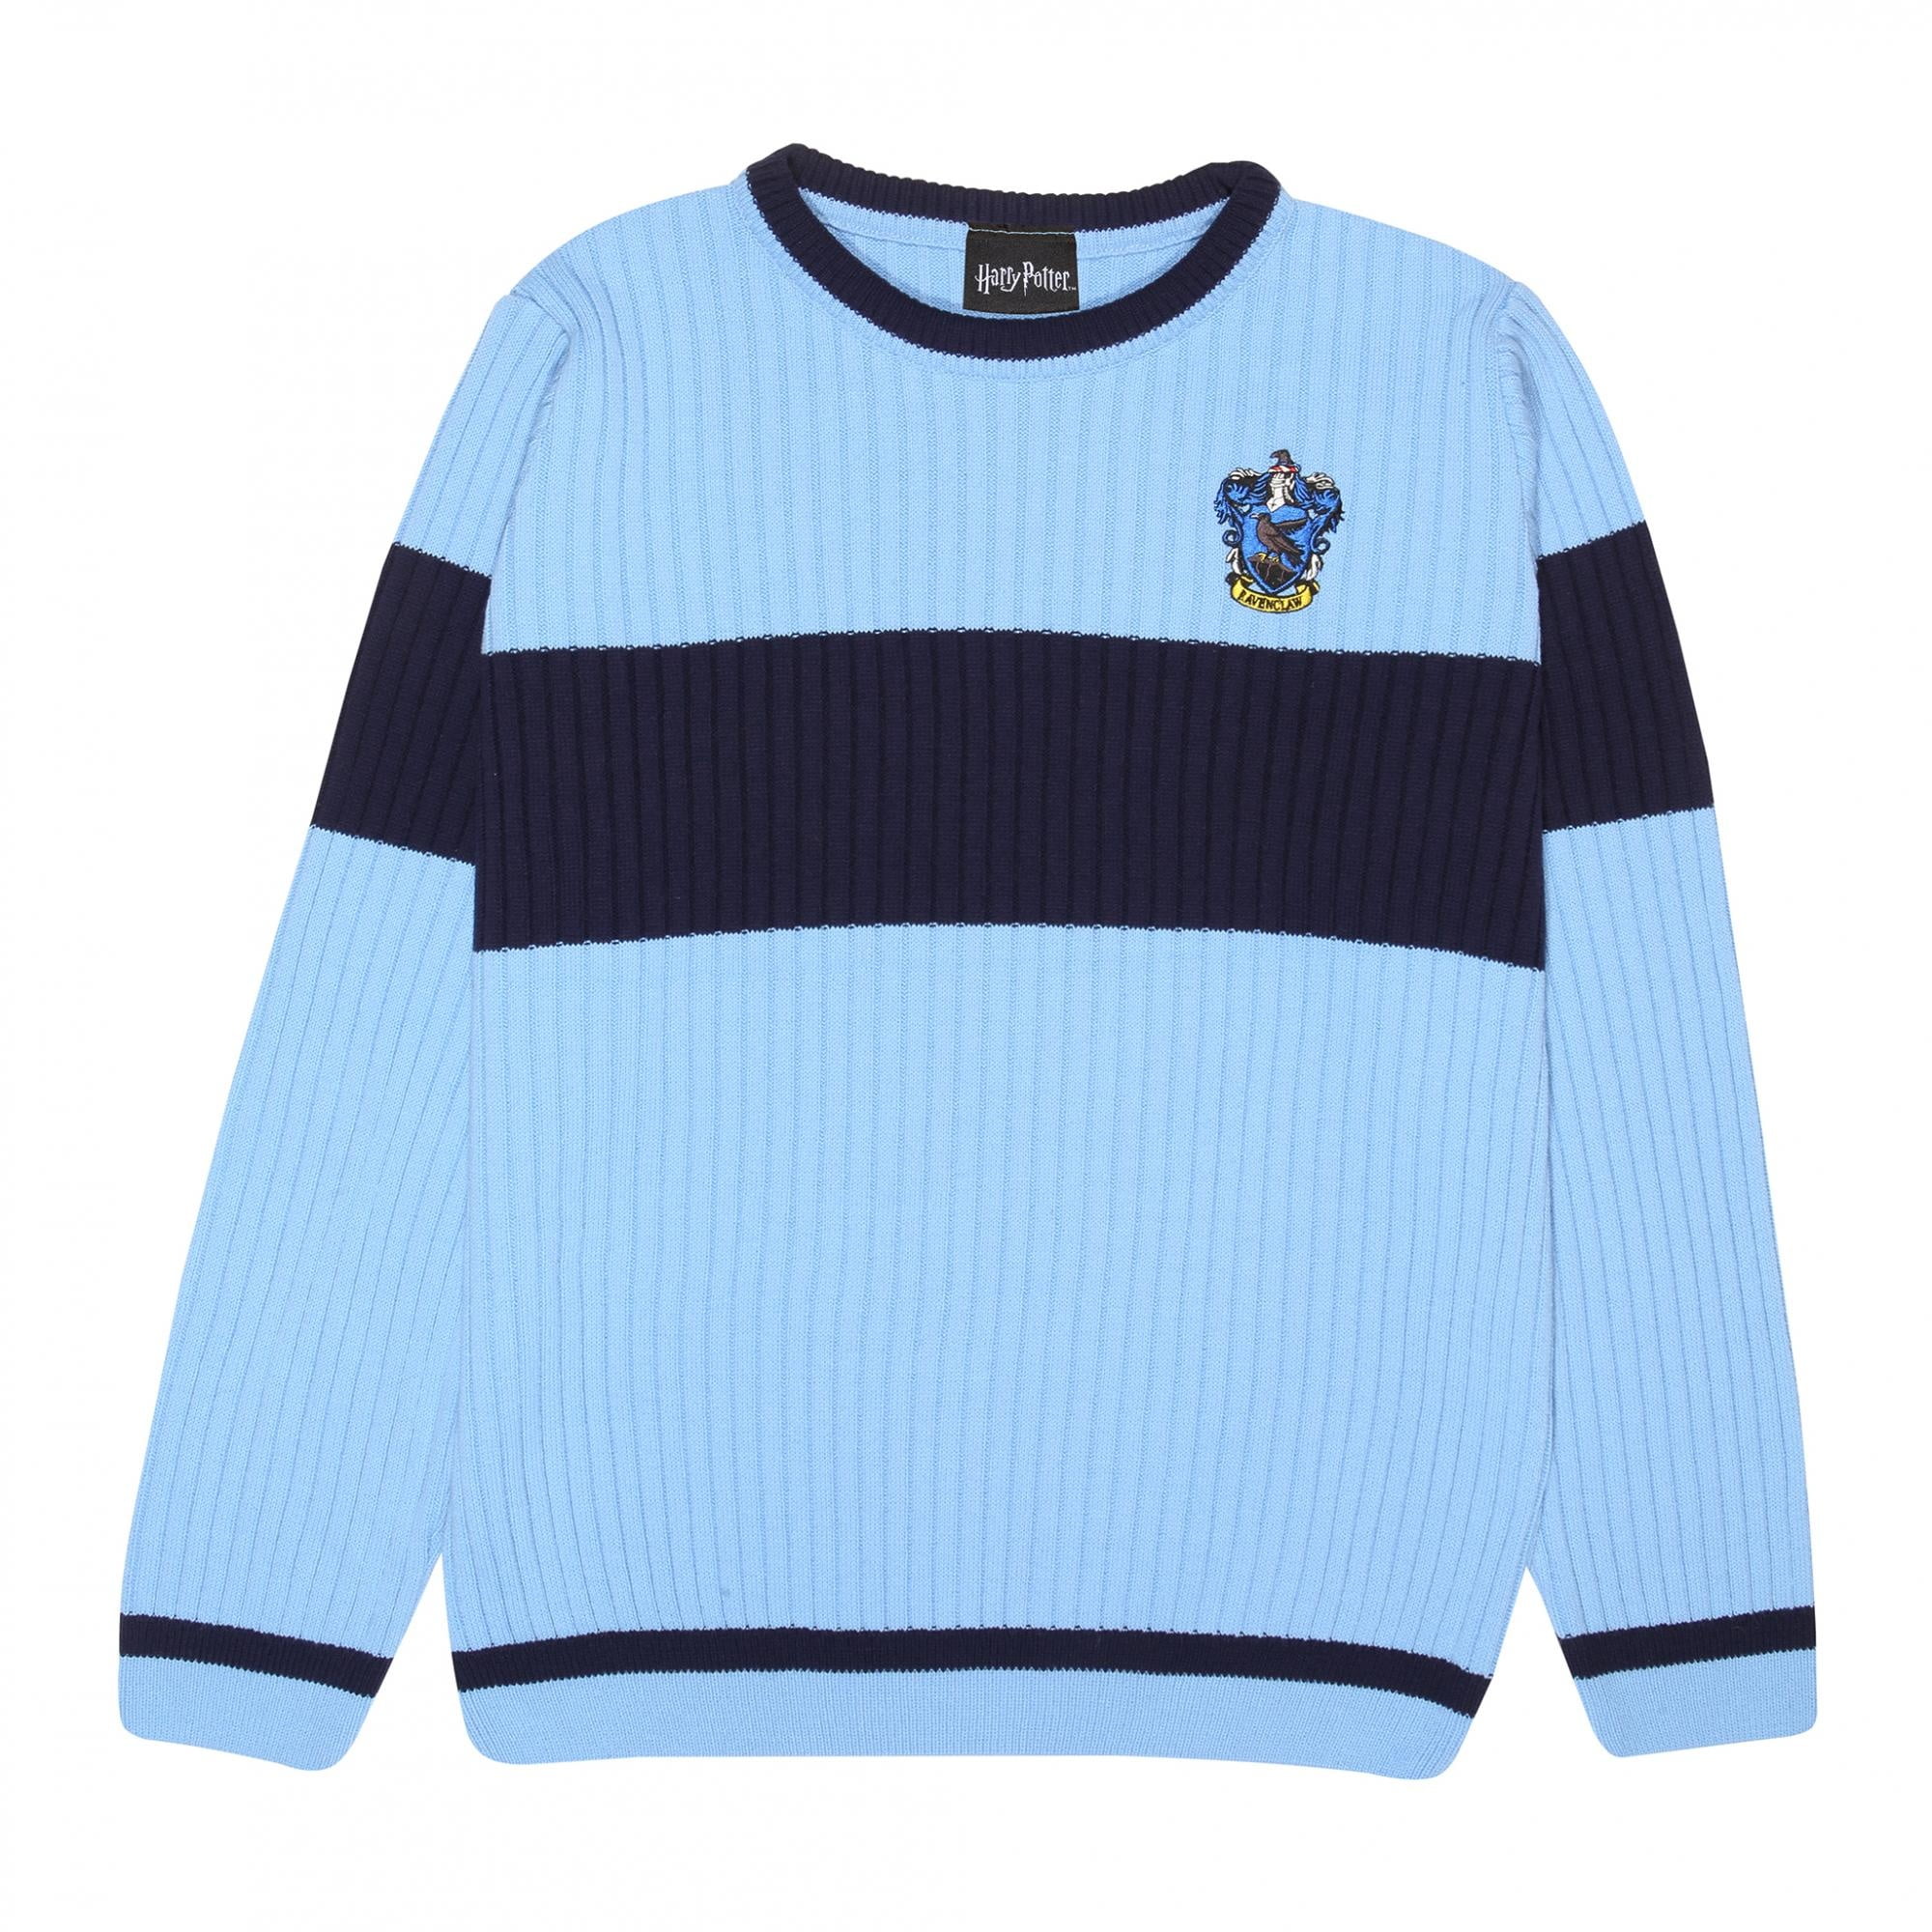 Official Kids Harry Potter Ravenclaw Quidditch Knitted Jumper Boys Girls